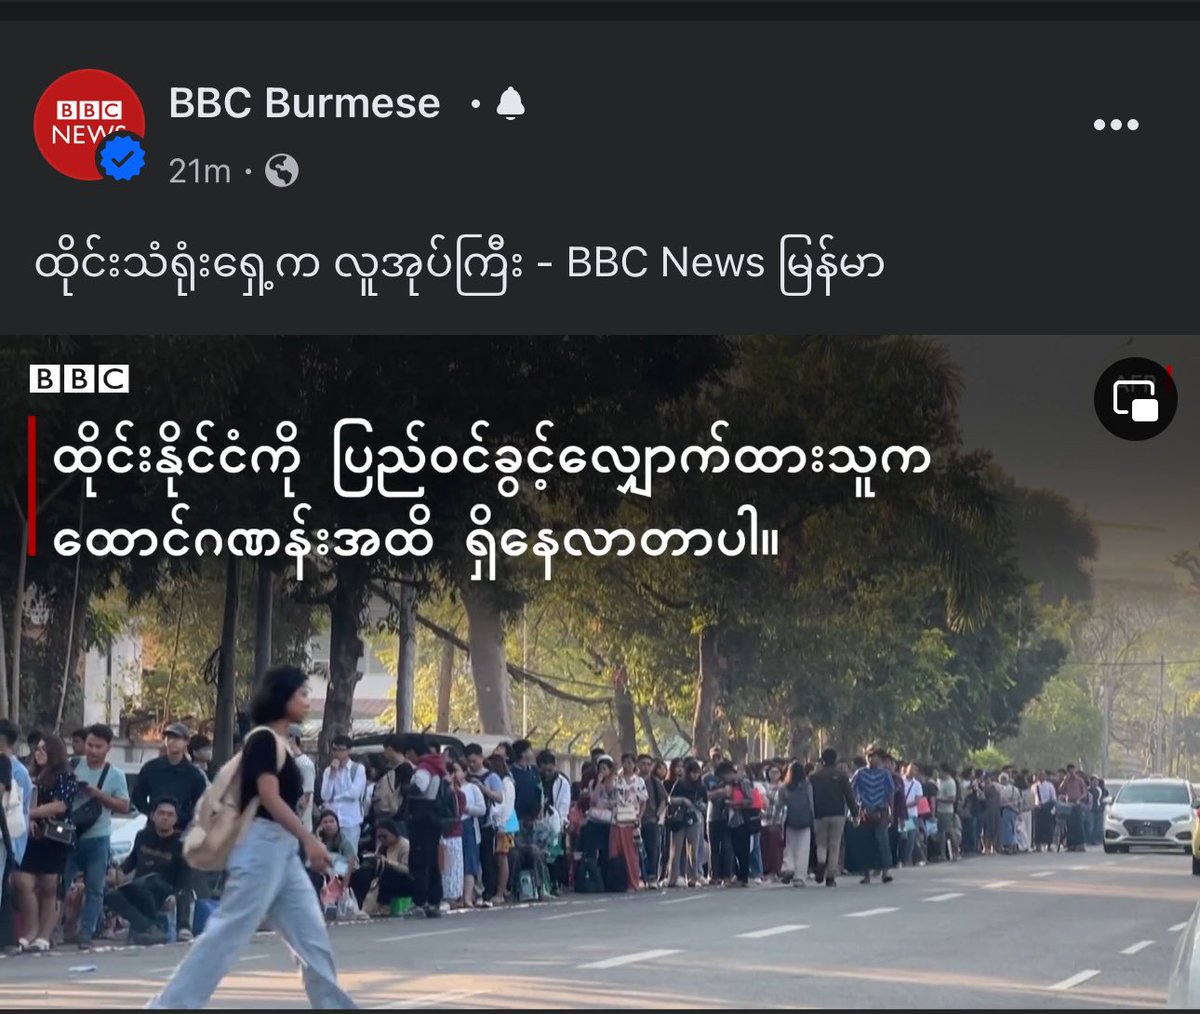 The junta's conscription laws have sparked panic among the public, leading to a huge influx of migration. This news shows long queues at the Thai Embassy for visa applications as people rush to leave the country. This reaffirms that the junta is the agent of chaos in Myanmar.